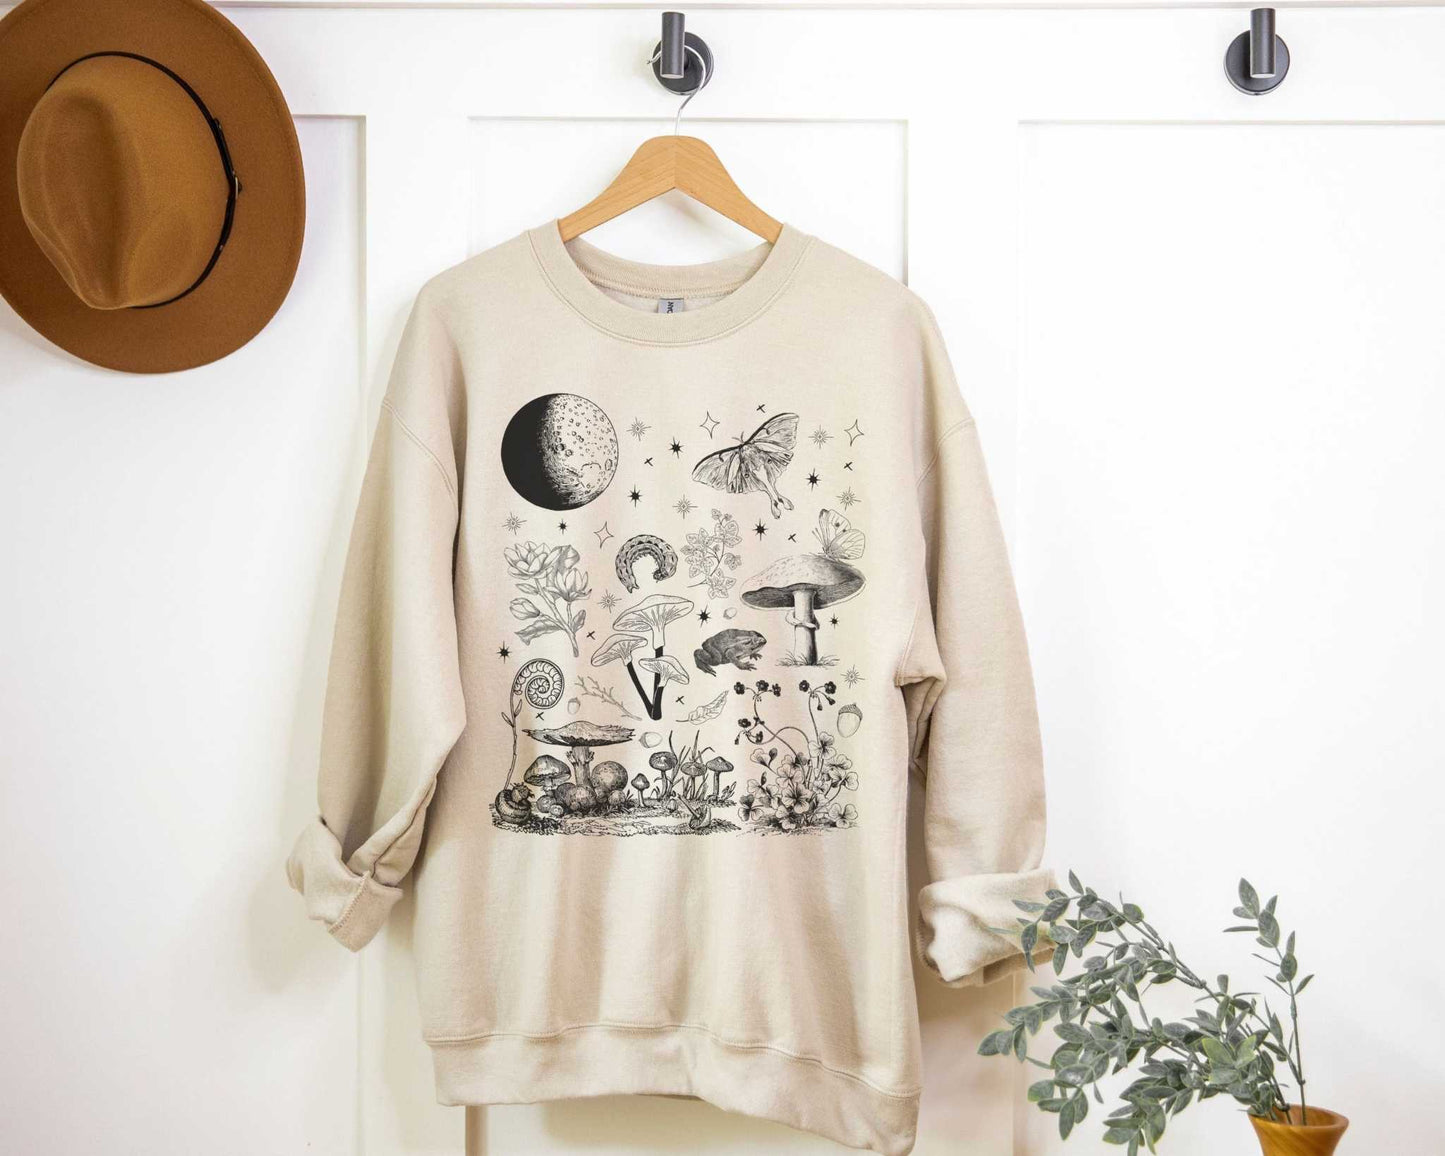 Mushroom Forest SweatshirtBring the beauty and magic of the forest at night into your fall and winter outfit rotation with this mushroom forest sweatshirt. Whether you're going for a forestco